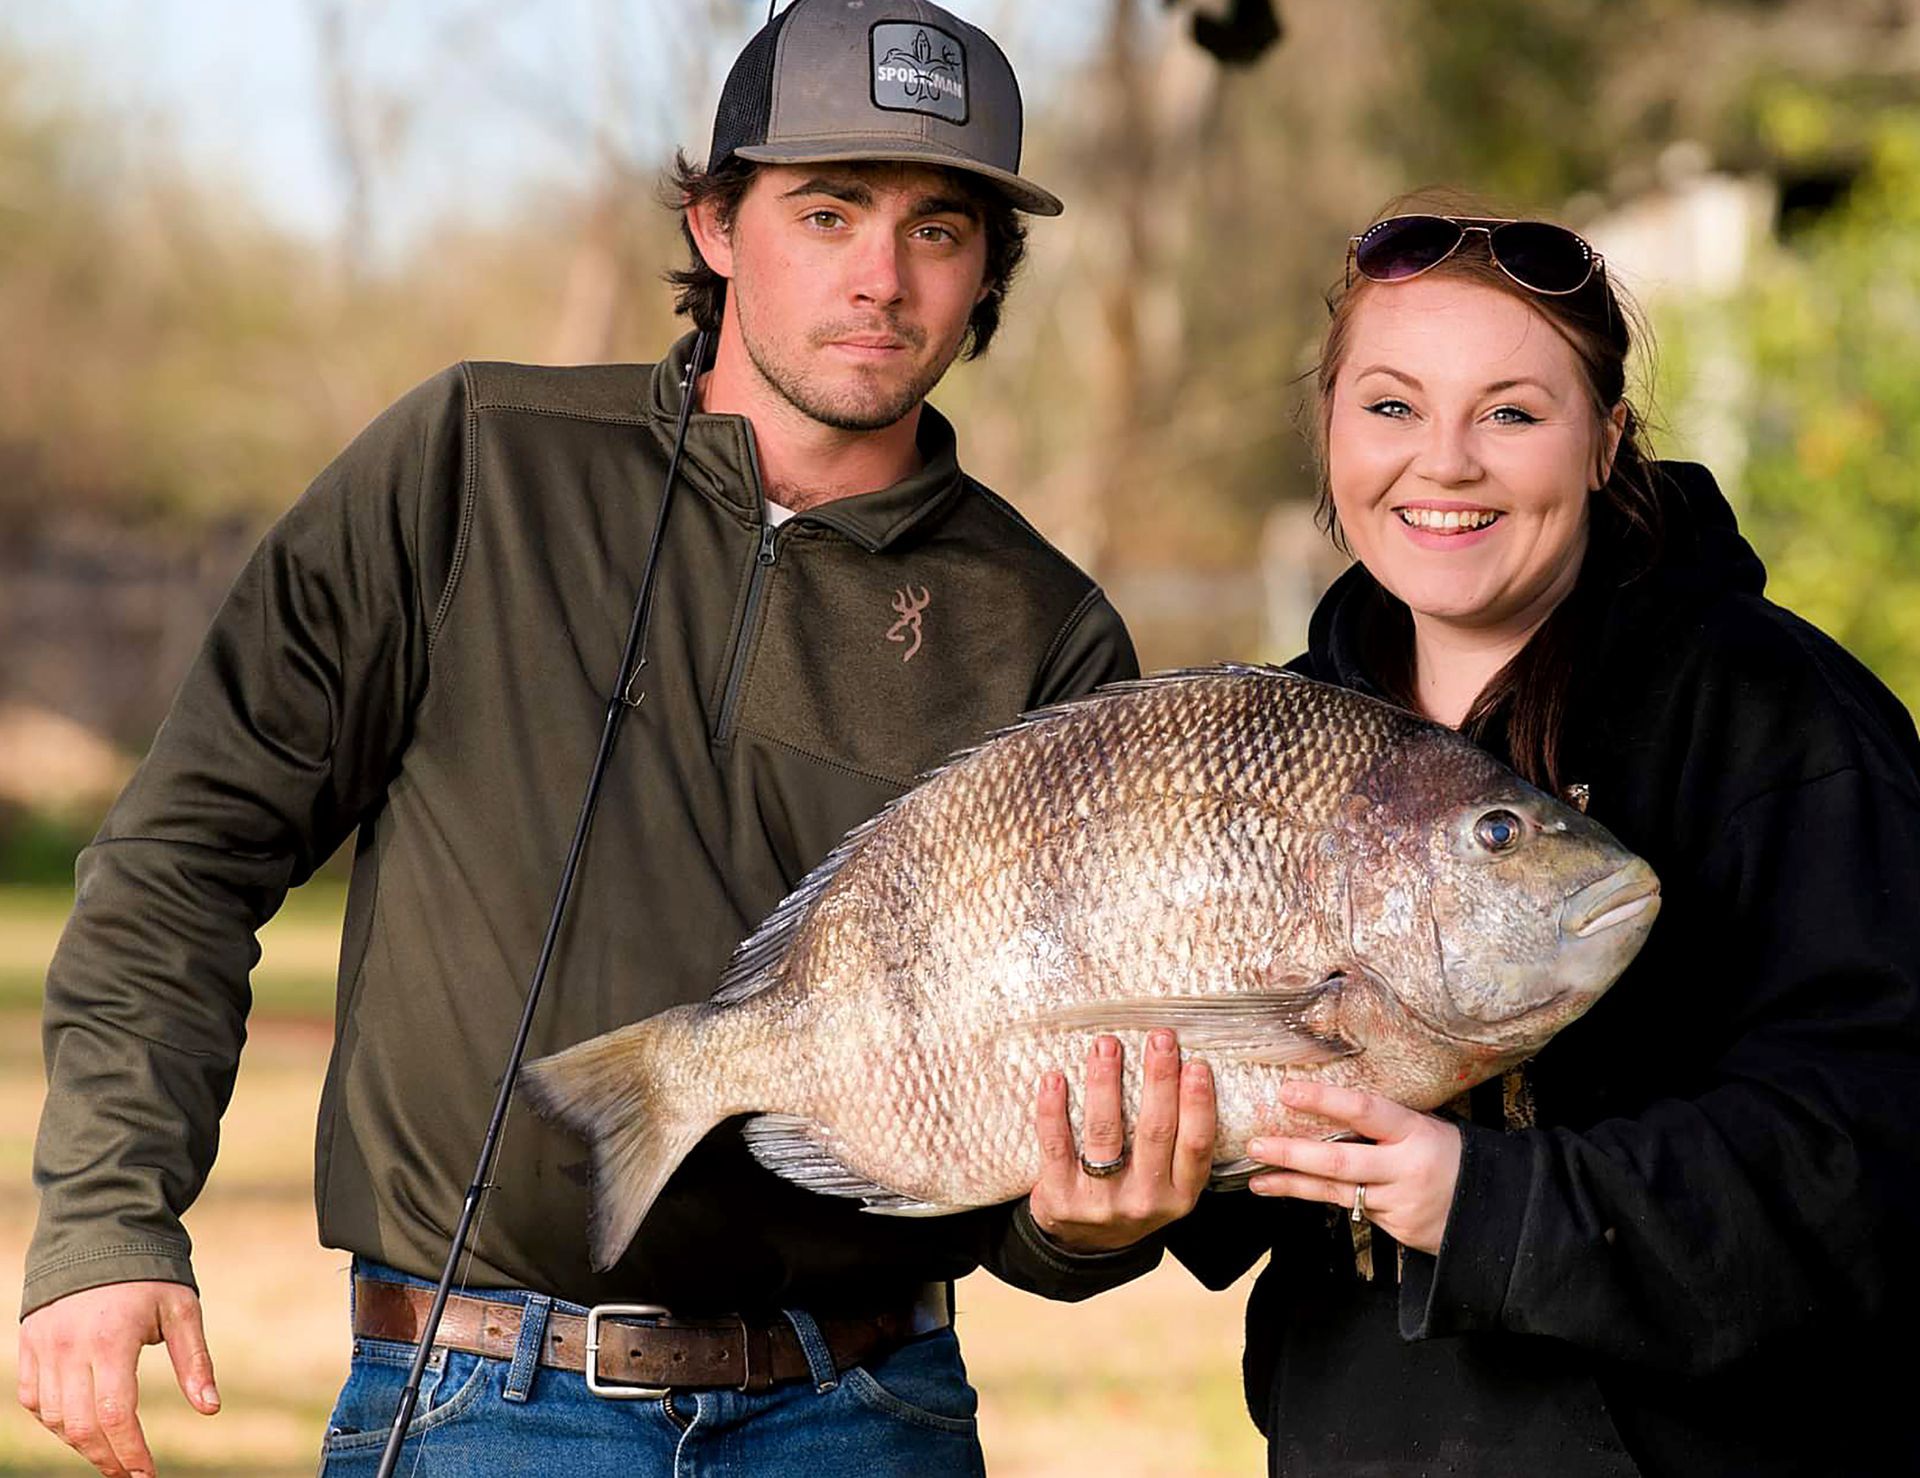 Kendale Jeans and her husband, Donovan, show off the state record sheepshead. Photo by Earl Wyant